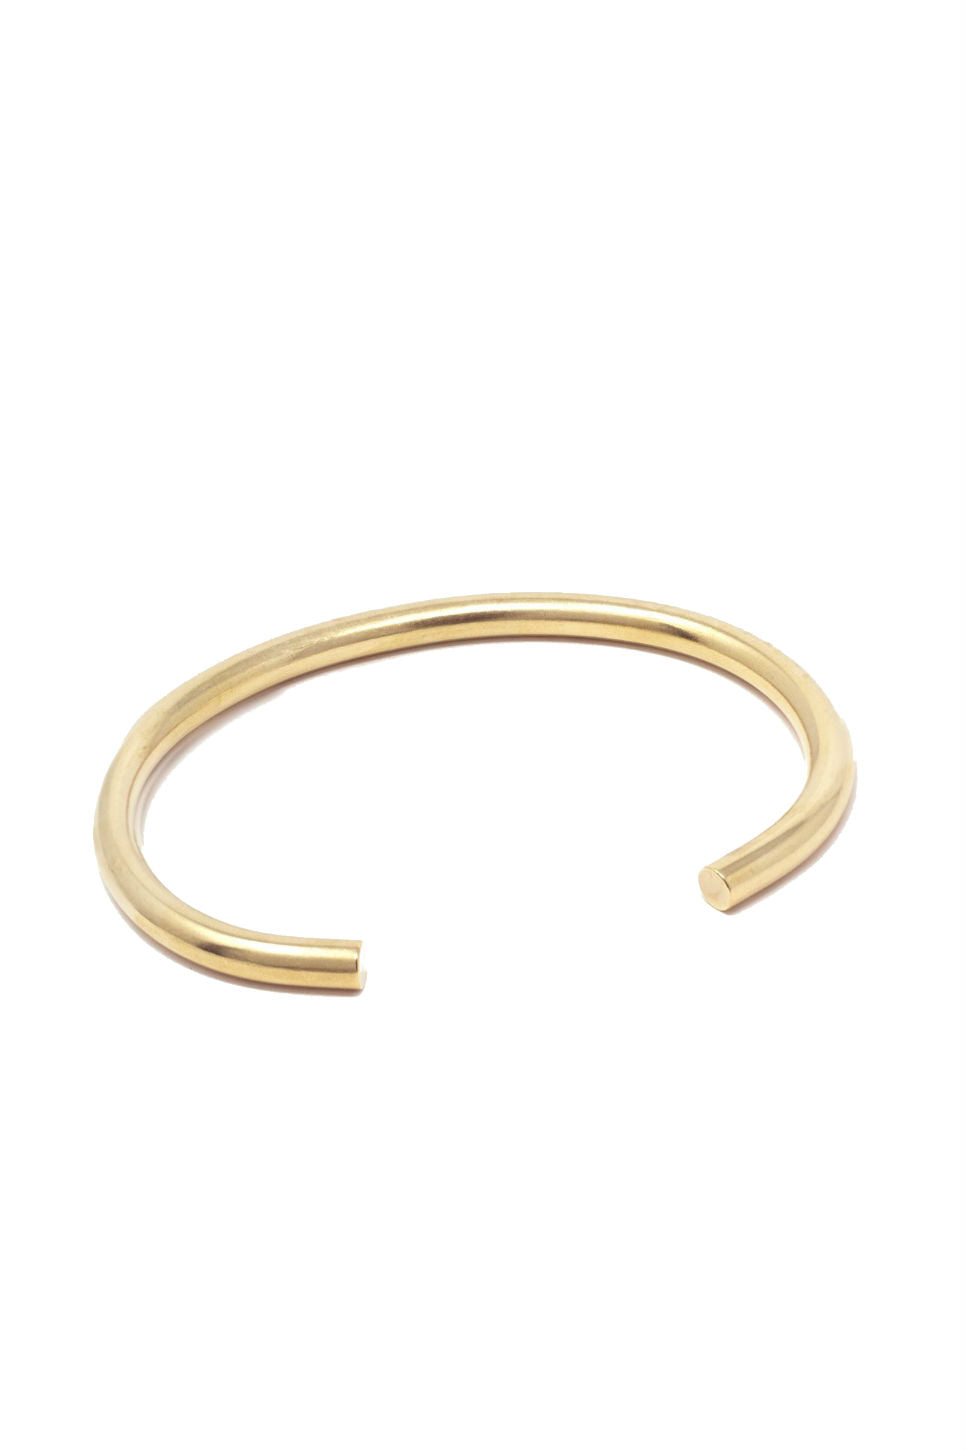 Able - Chunky Cuff Bracelet - Gold